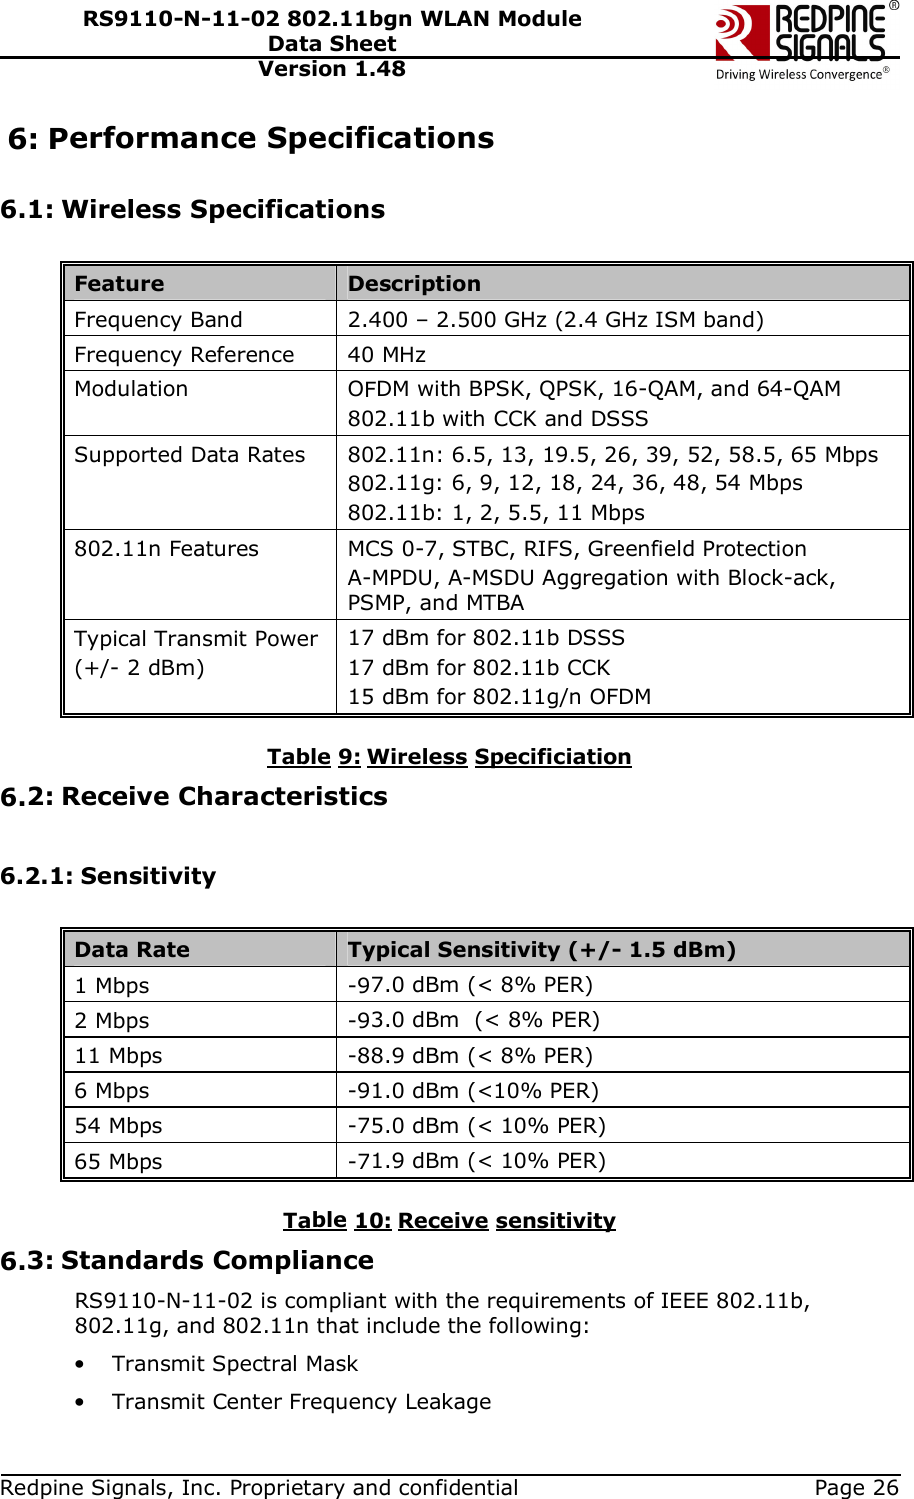   Redpine Signals, Inc. Proprietary and confidential  Page 26 RS9110-N-11-02 802.11bgn WLAN Module Data Sheet Version 1.48 6: Performance Specifications  6.1: Wireless Specifications  Feature  Description Frequency Band  2.400 – 2.500 GHz (2.4 GHz ISM band) Frequency Reference  40 MHz Modulation  OFDM with BPSK, QPSK, 16-QAM, and 64-QAM  802.11b with CCK and DSSS Supported Data Rates  802.11n: 6.5, 13, 19.5, 26, 39, 52, 58.5, 65 Mbps 802.11g: 6, 9, 12, 18, 24, 36, 48, 54 Mbps 802.11b: 1, 2, 5.5, 11 Mbps 802.11n Features  MCS 0-7, STBC, RIFS, Greenfield Protection A-MPDU, A-MSDU Aggregation with Block-ack, PSMP, and MTBA Typical Transmit Power (+/- 2 dBm) 17 dBm for 802.11b DSSS 17 dBm for 802.11b CCK 15 dBm for 802.11g/n OFDM  Table 9: Wireless Specificiation 6.2: Receive Characteristics  6.2.1: Sensitivity  Data Rate  Typical Sensitivity (+/- 1.5 dBm) 1 Mbps  -97.0 dBm (&lt; 8% PER) 2 Mbps  -93.0 dBm  (&lt; 8% PER) 11 Mbps  -88.9 dBm (&lt; 8% PER) 6 Mbps  -91.0 dBm (&lt;10% PER) 54 Mbps  -75.0 dBm (&lt; 10% PER) 65 Mbps  -71.9 dBm (&lt; 10% PER)  Table 10: Receive sensitivity 6.3: Standards Compliance RS9110-N-11-02 is compliant with the requirements of IEEE 802.11b, 802.11g, and 802.11n that include the following: • Transmit Spectral Mask • Transmit Center Frequency Leakage 